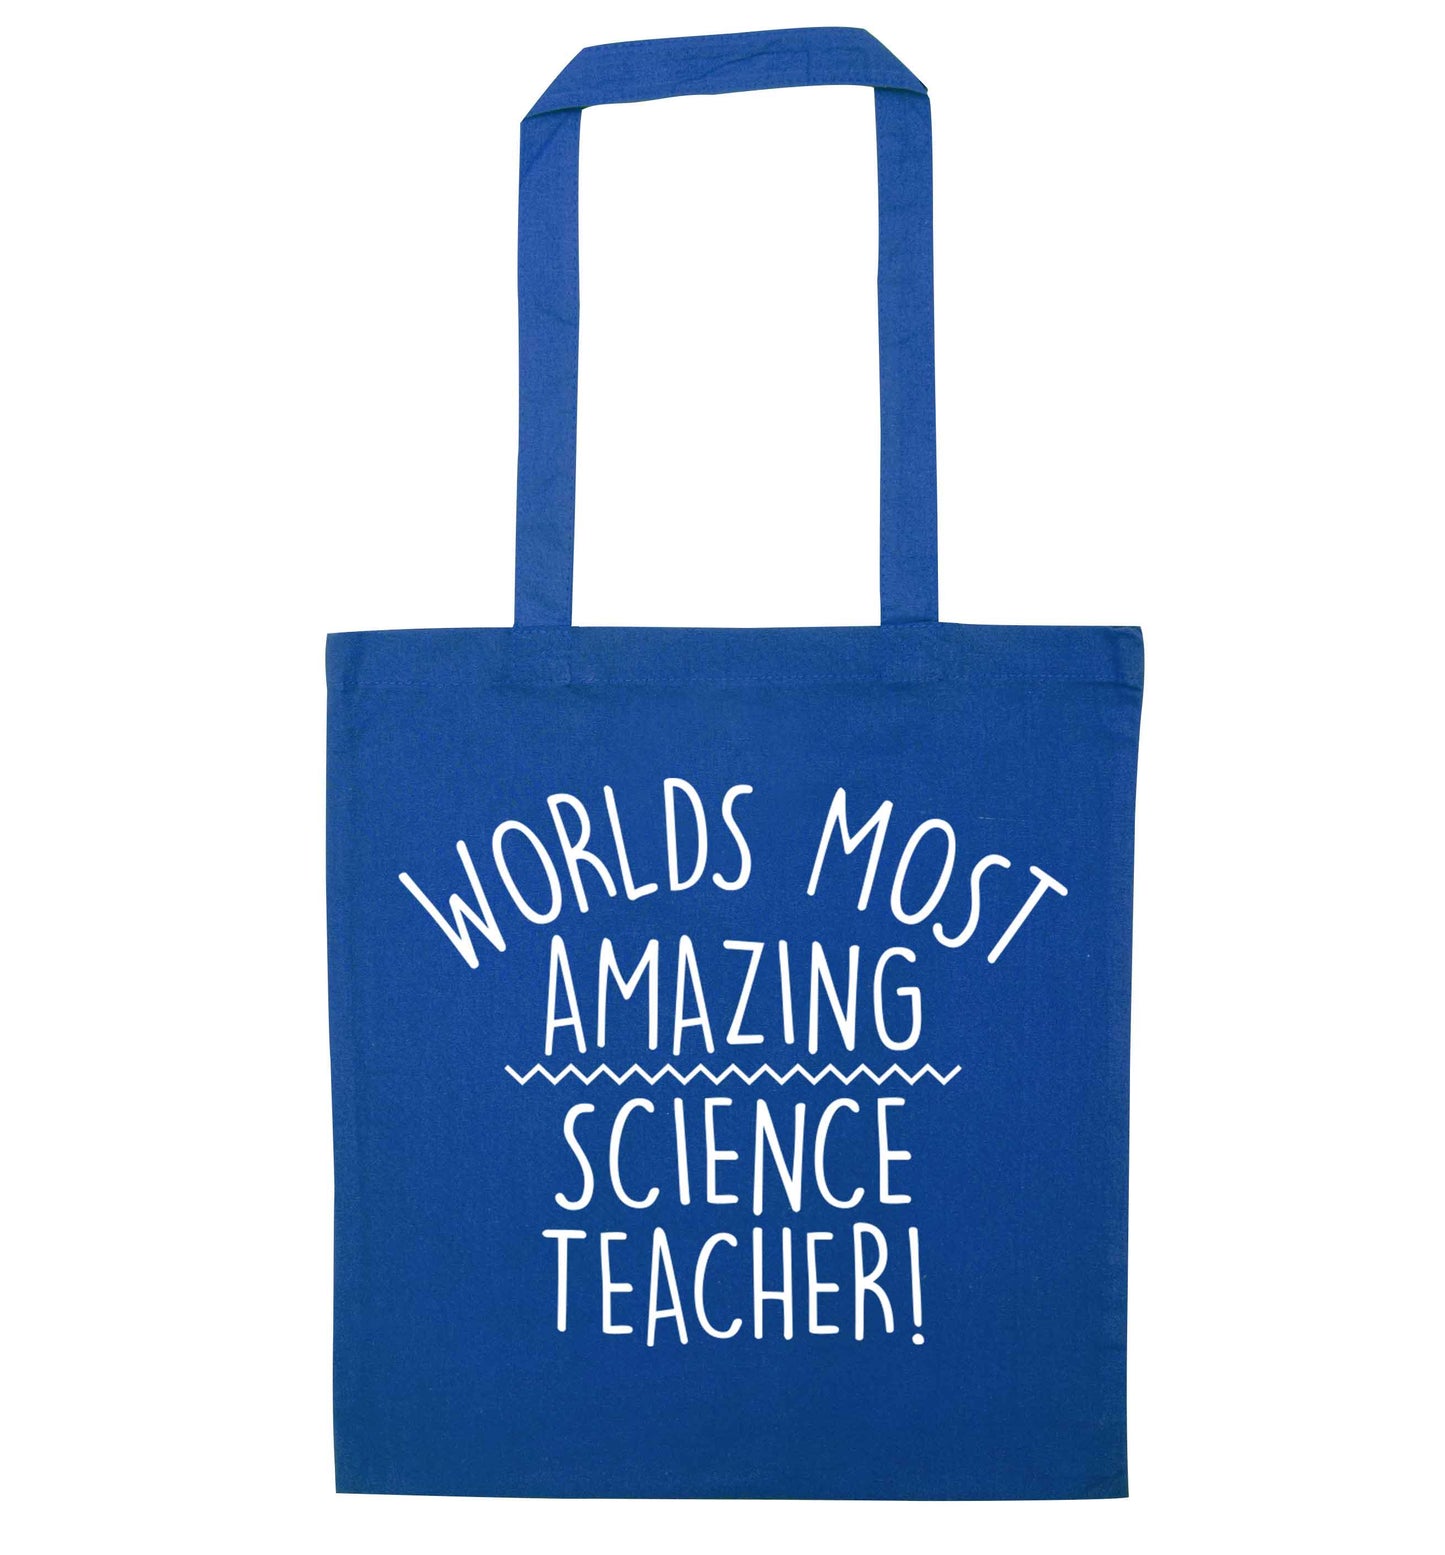 Worlds most amazing science teacher blue tote bag